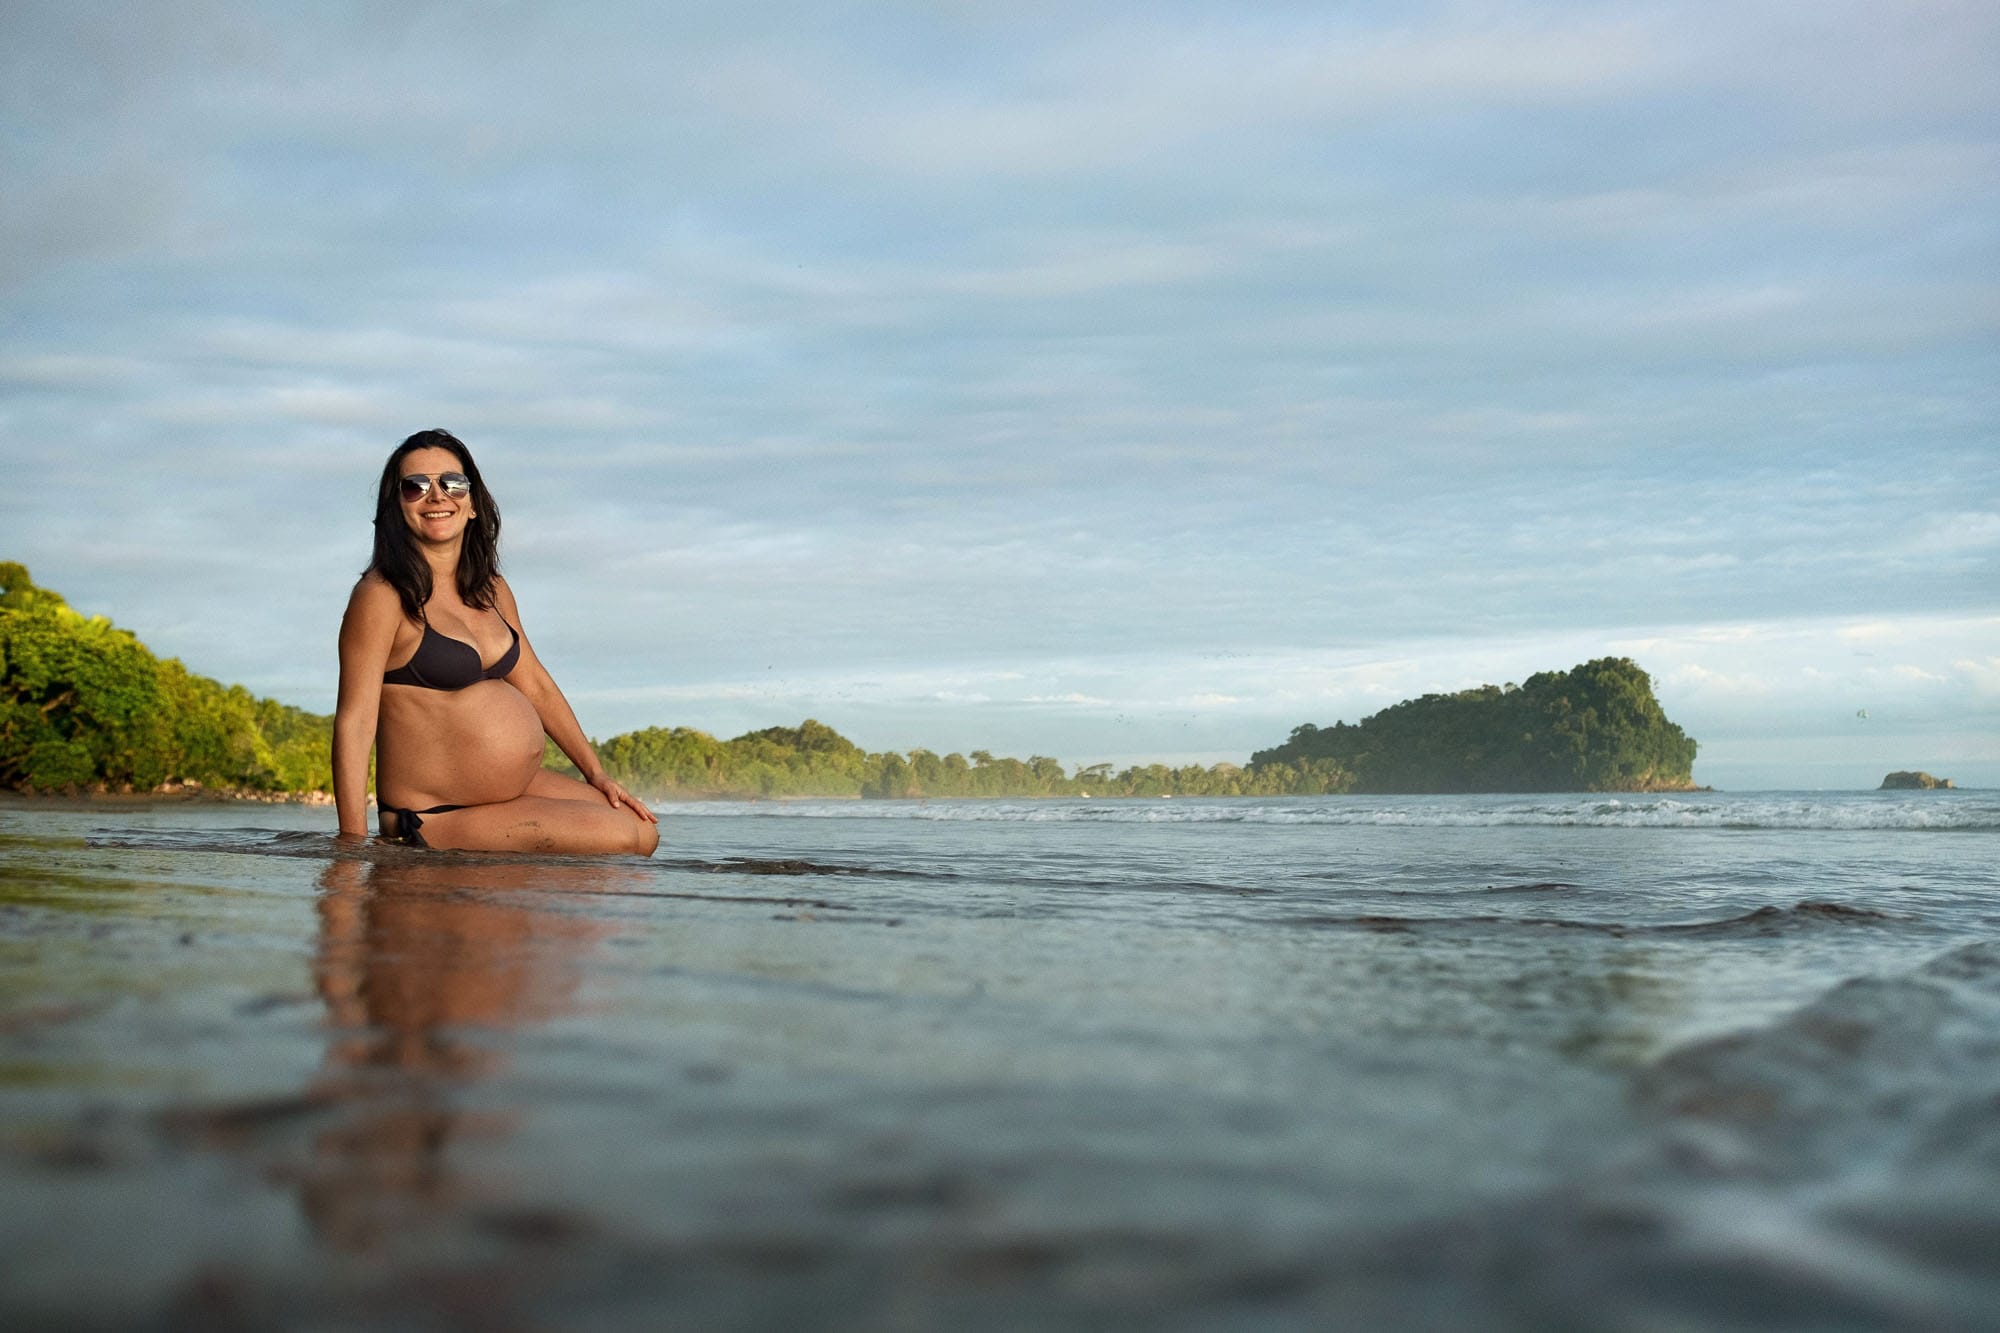 Maternity session at the beach in Costa Rica